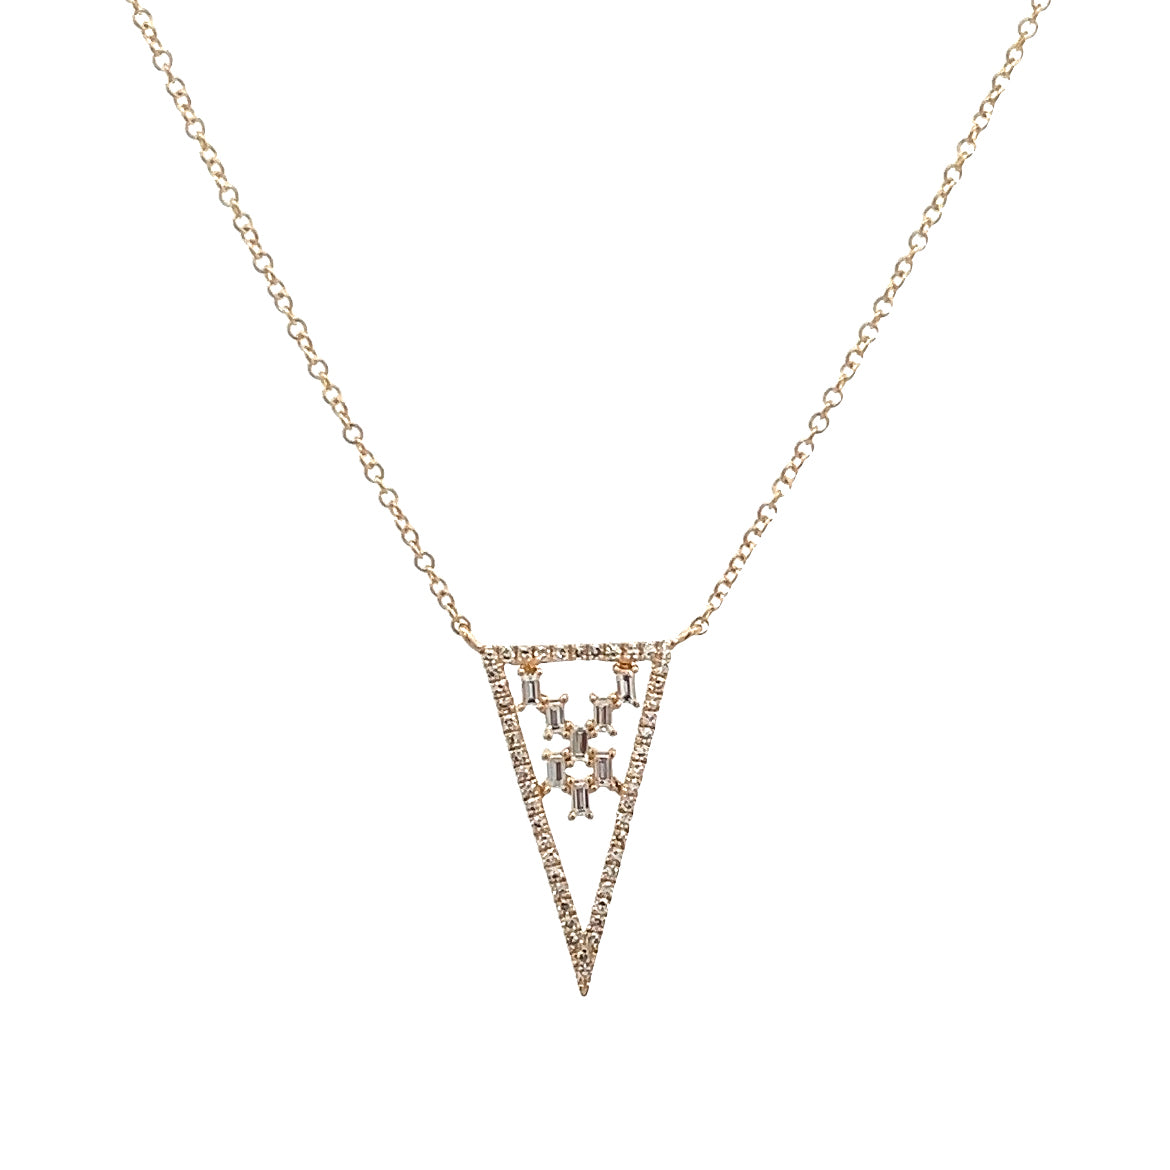 14K GOLD TRIANGLE NECKLACE WITH BAGUETTE DIAMONDS